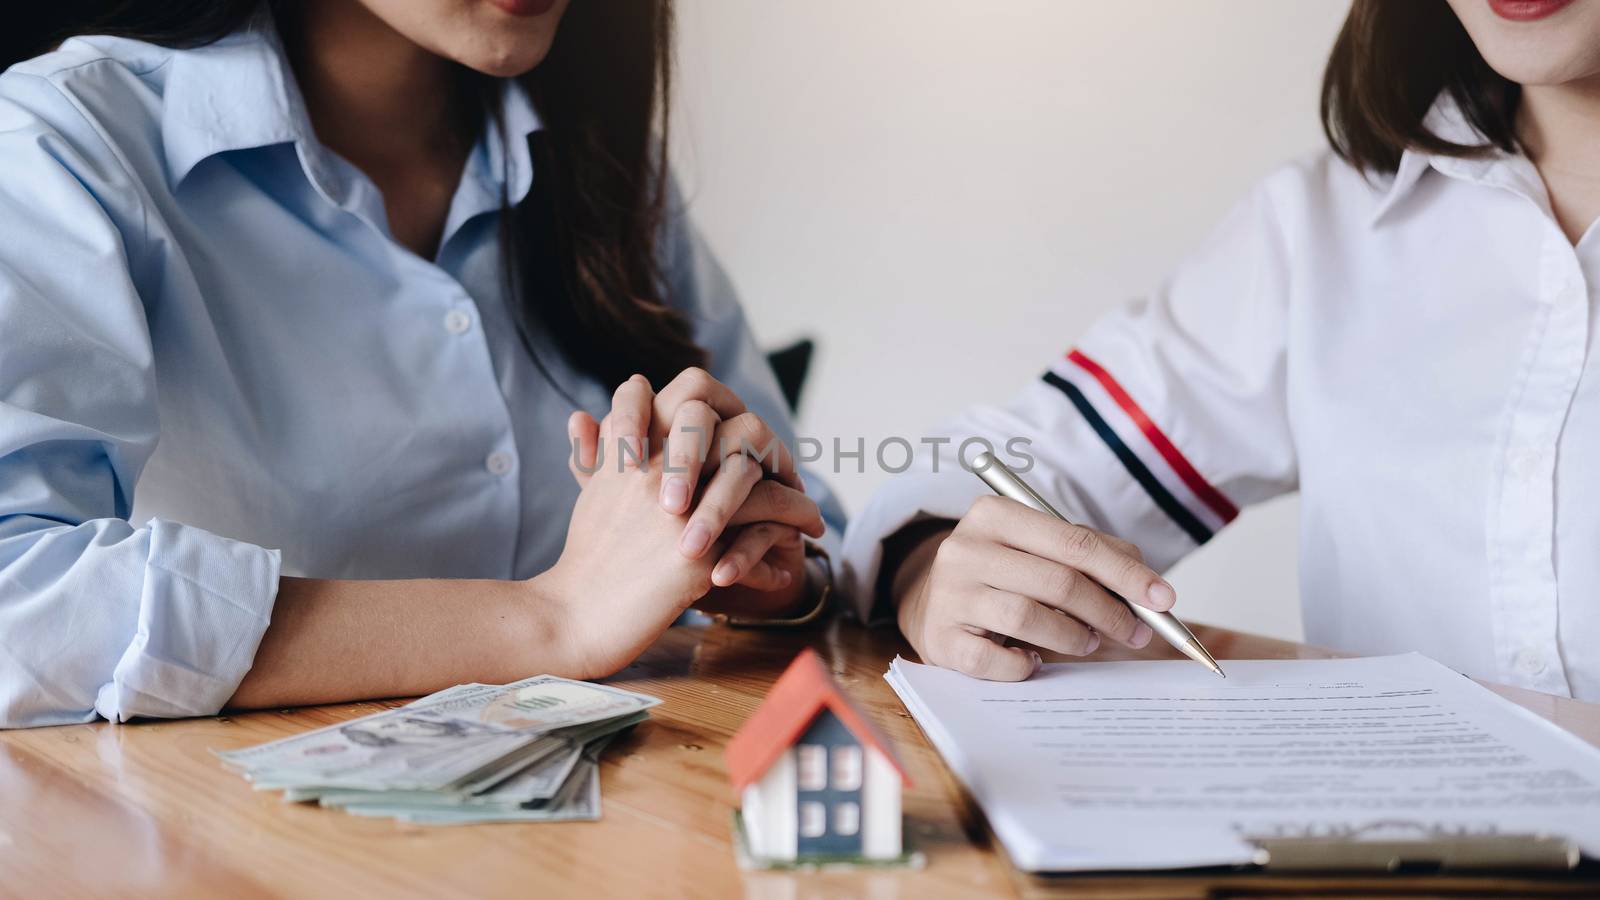 Real estate agent offer hand for customer sign agreement contract signature for buy or sell house. Real estate concept contact agreement concept
